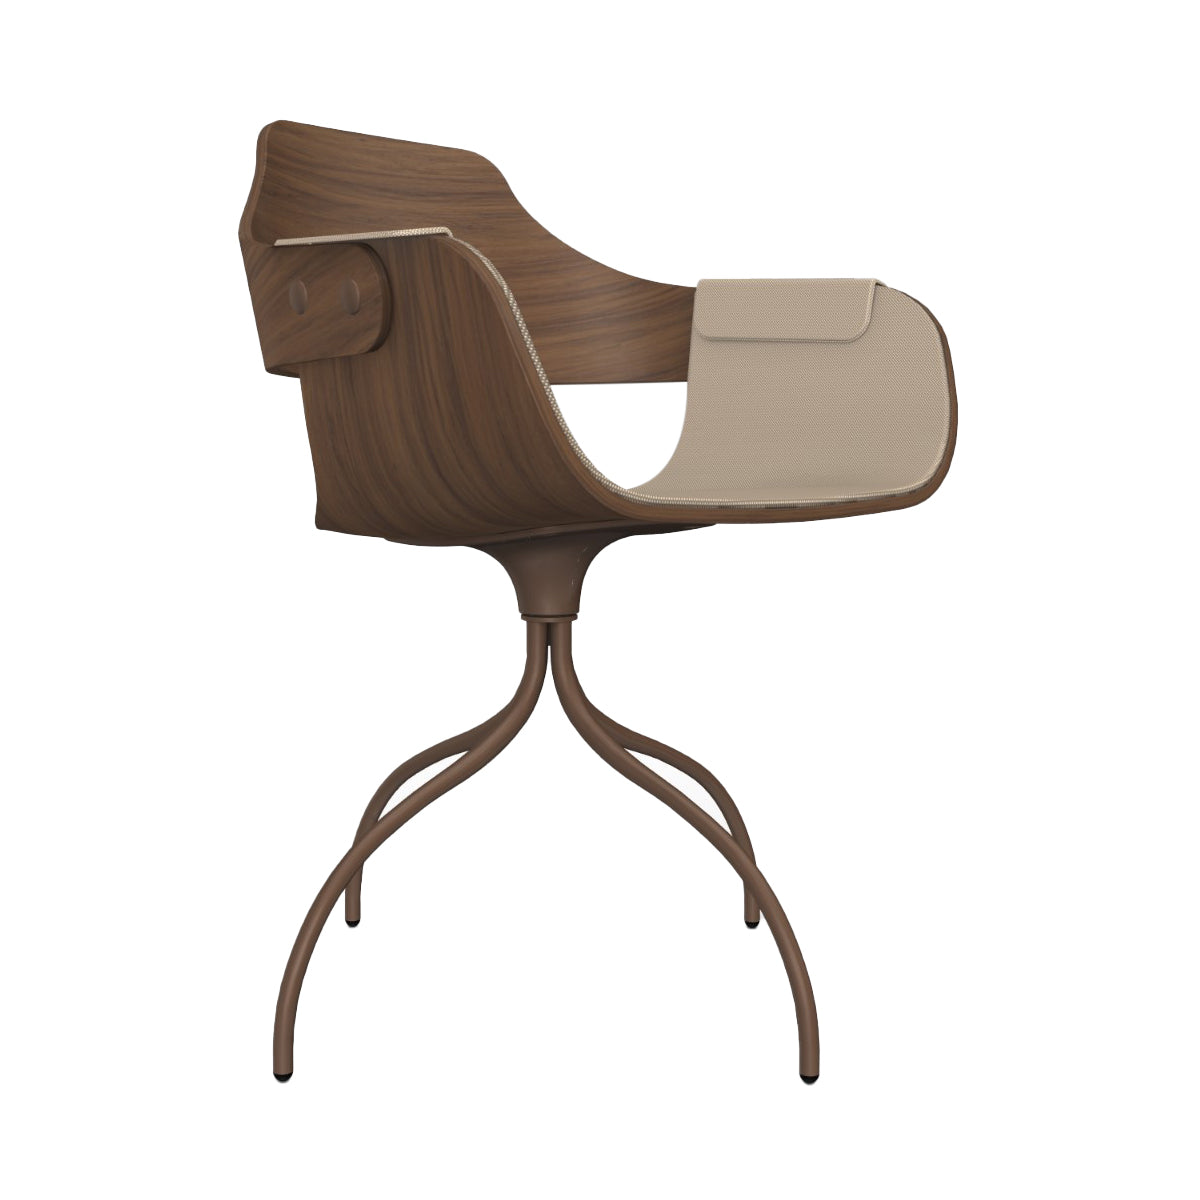 Showtime Chair with Swivel Base: Seat + Armrest Upholstered + Pale Brown